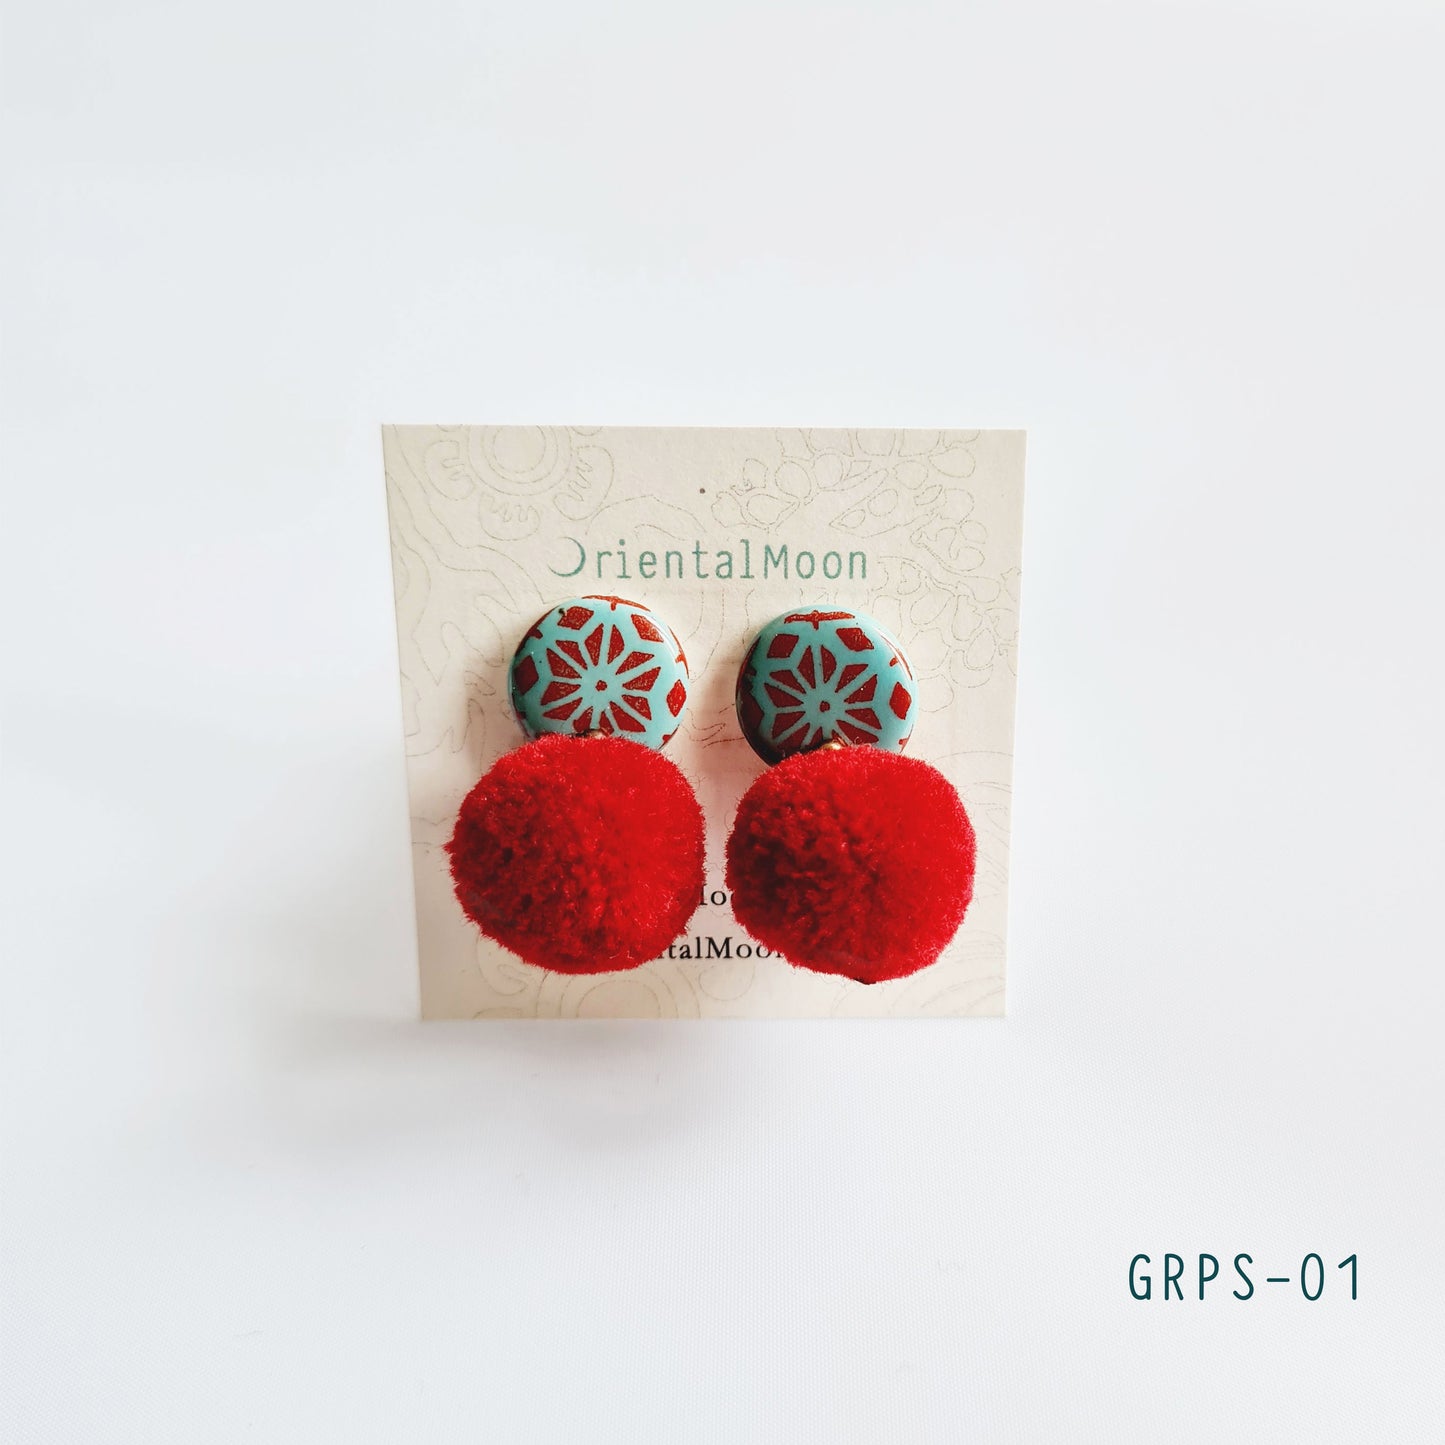 Red & white ceramic stud earrings decorated with Pom Pom ( Pattern type)